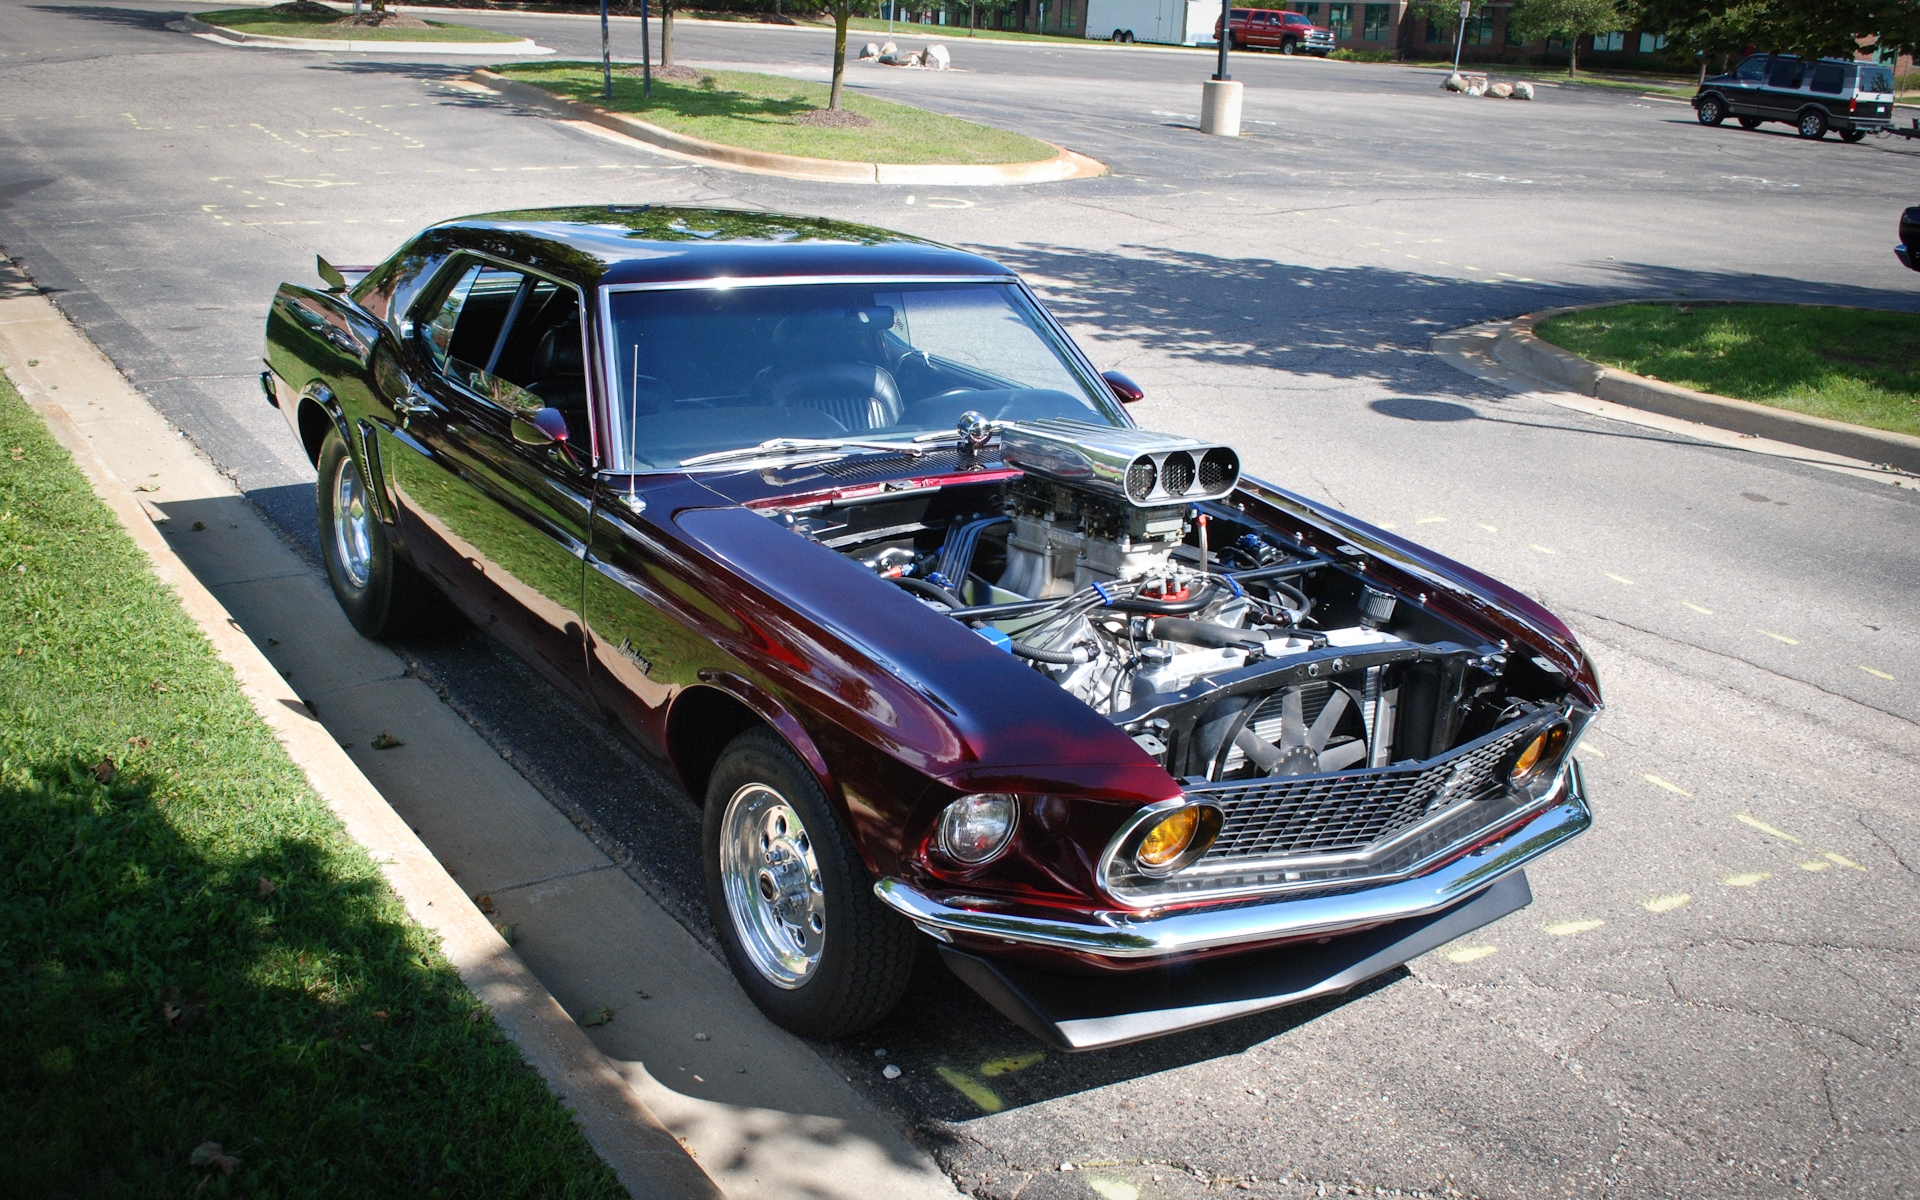 Vehicles Cars Ford Mustang Hot Rods Muscle Car Classic - Old Muscle Car Engine - HD Wallpaper 